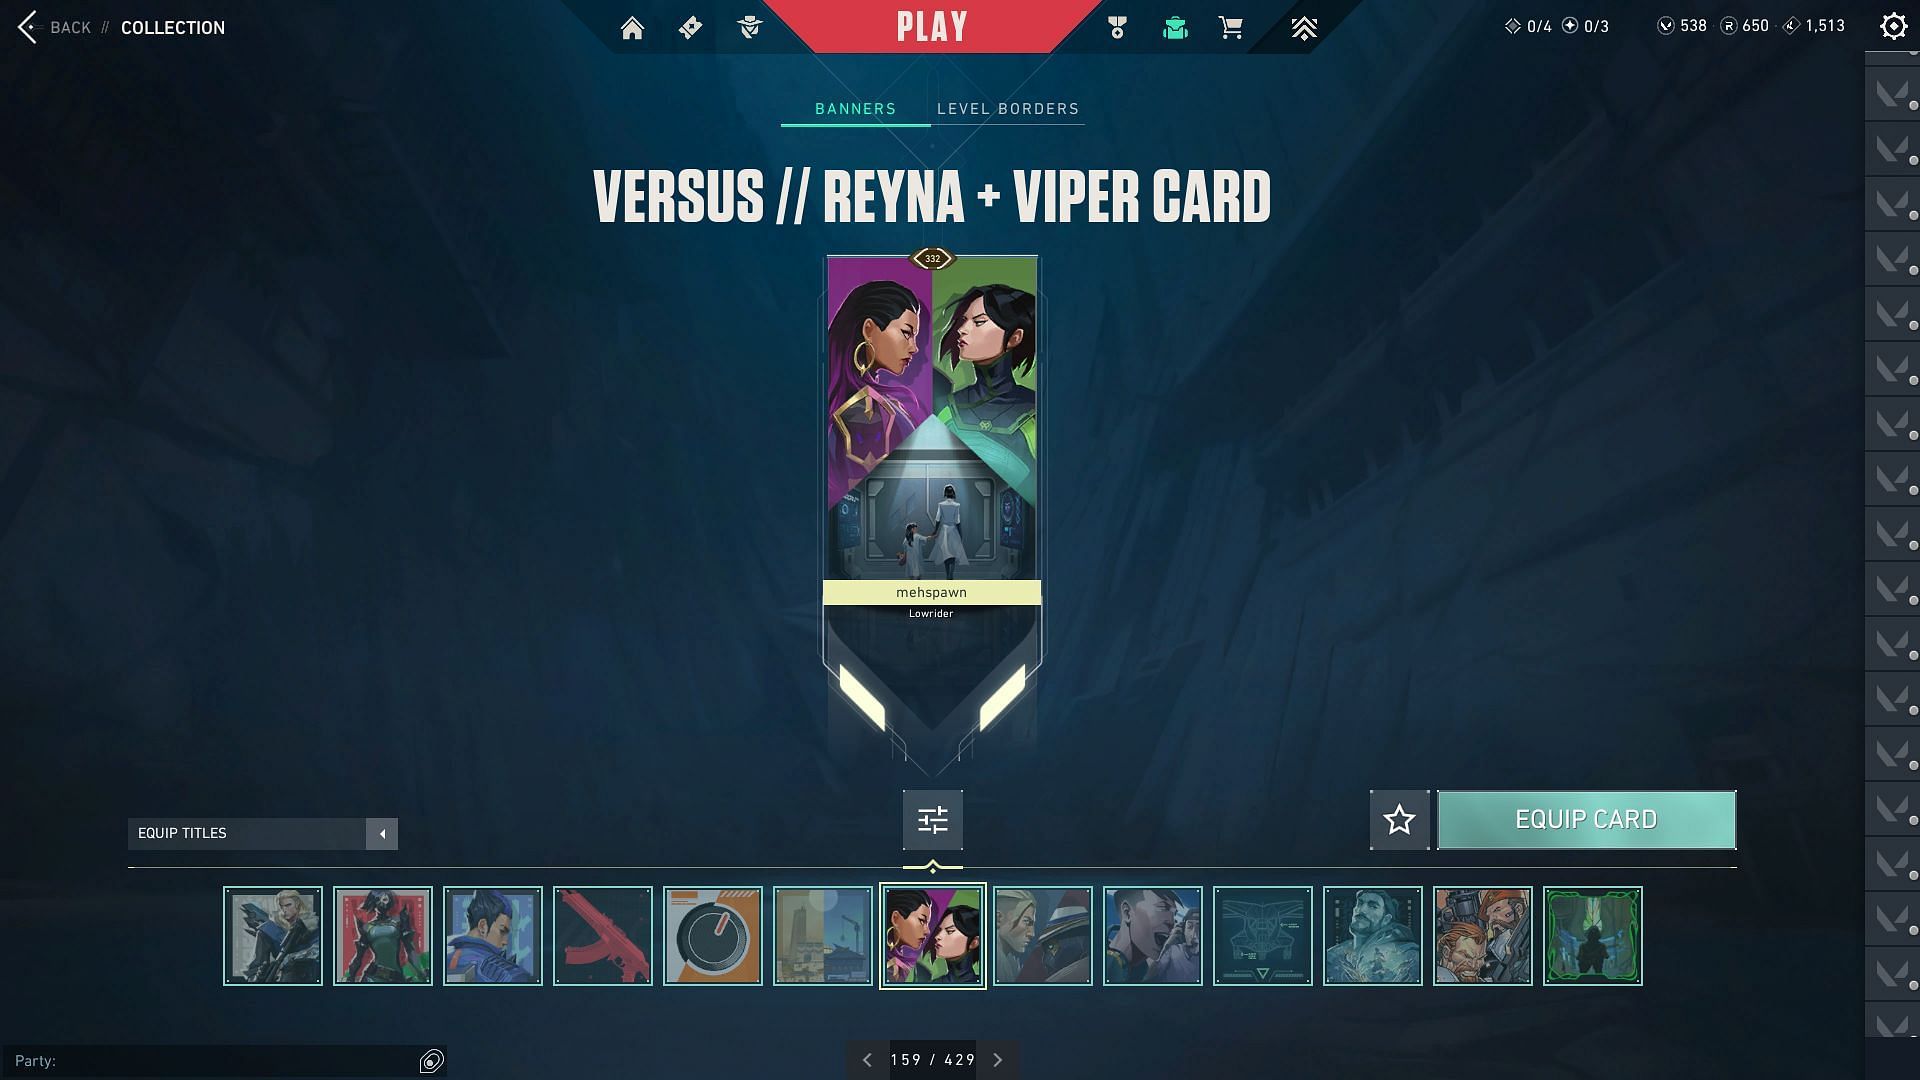 The Versus Reyna+Viper Player Card (Image via Riot Games)